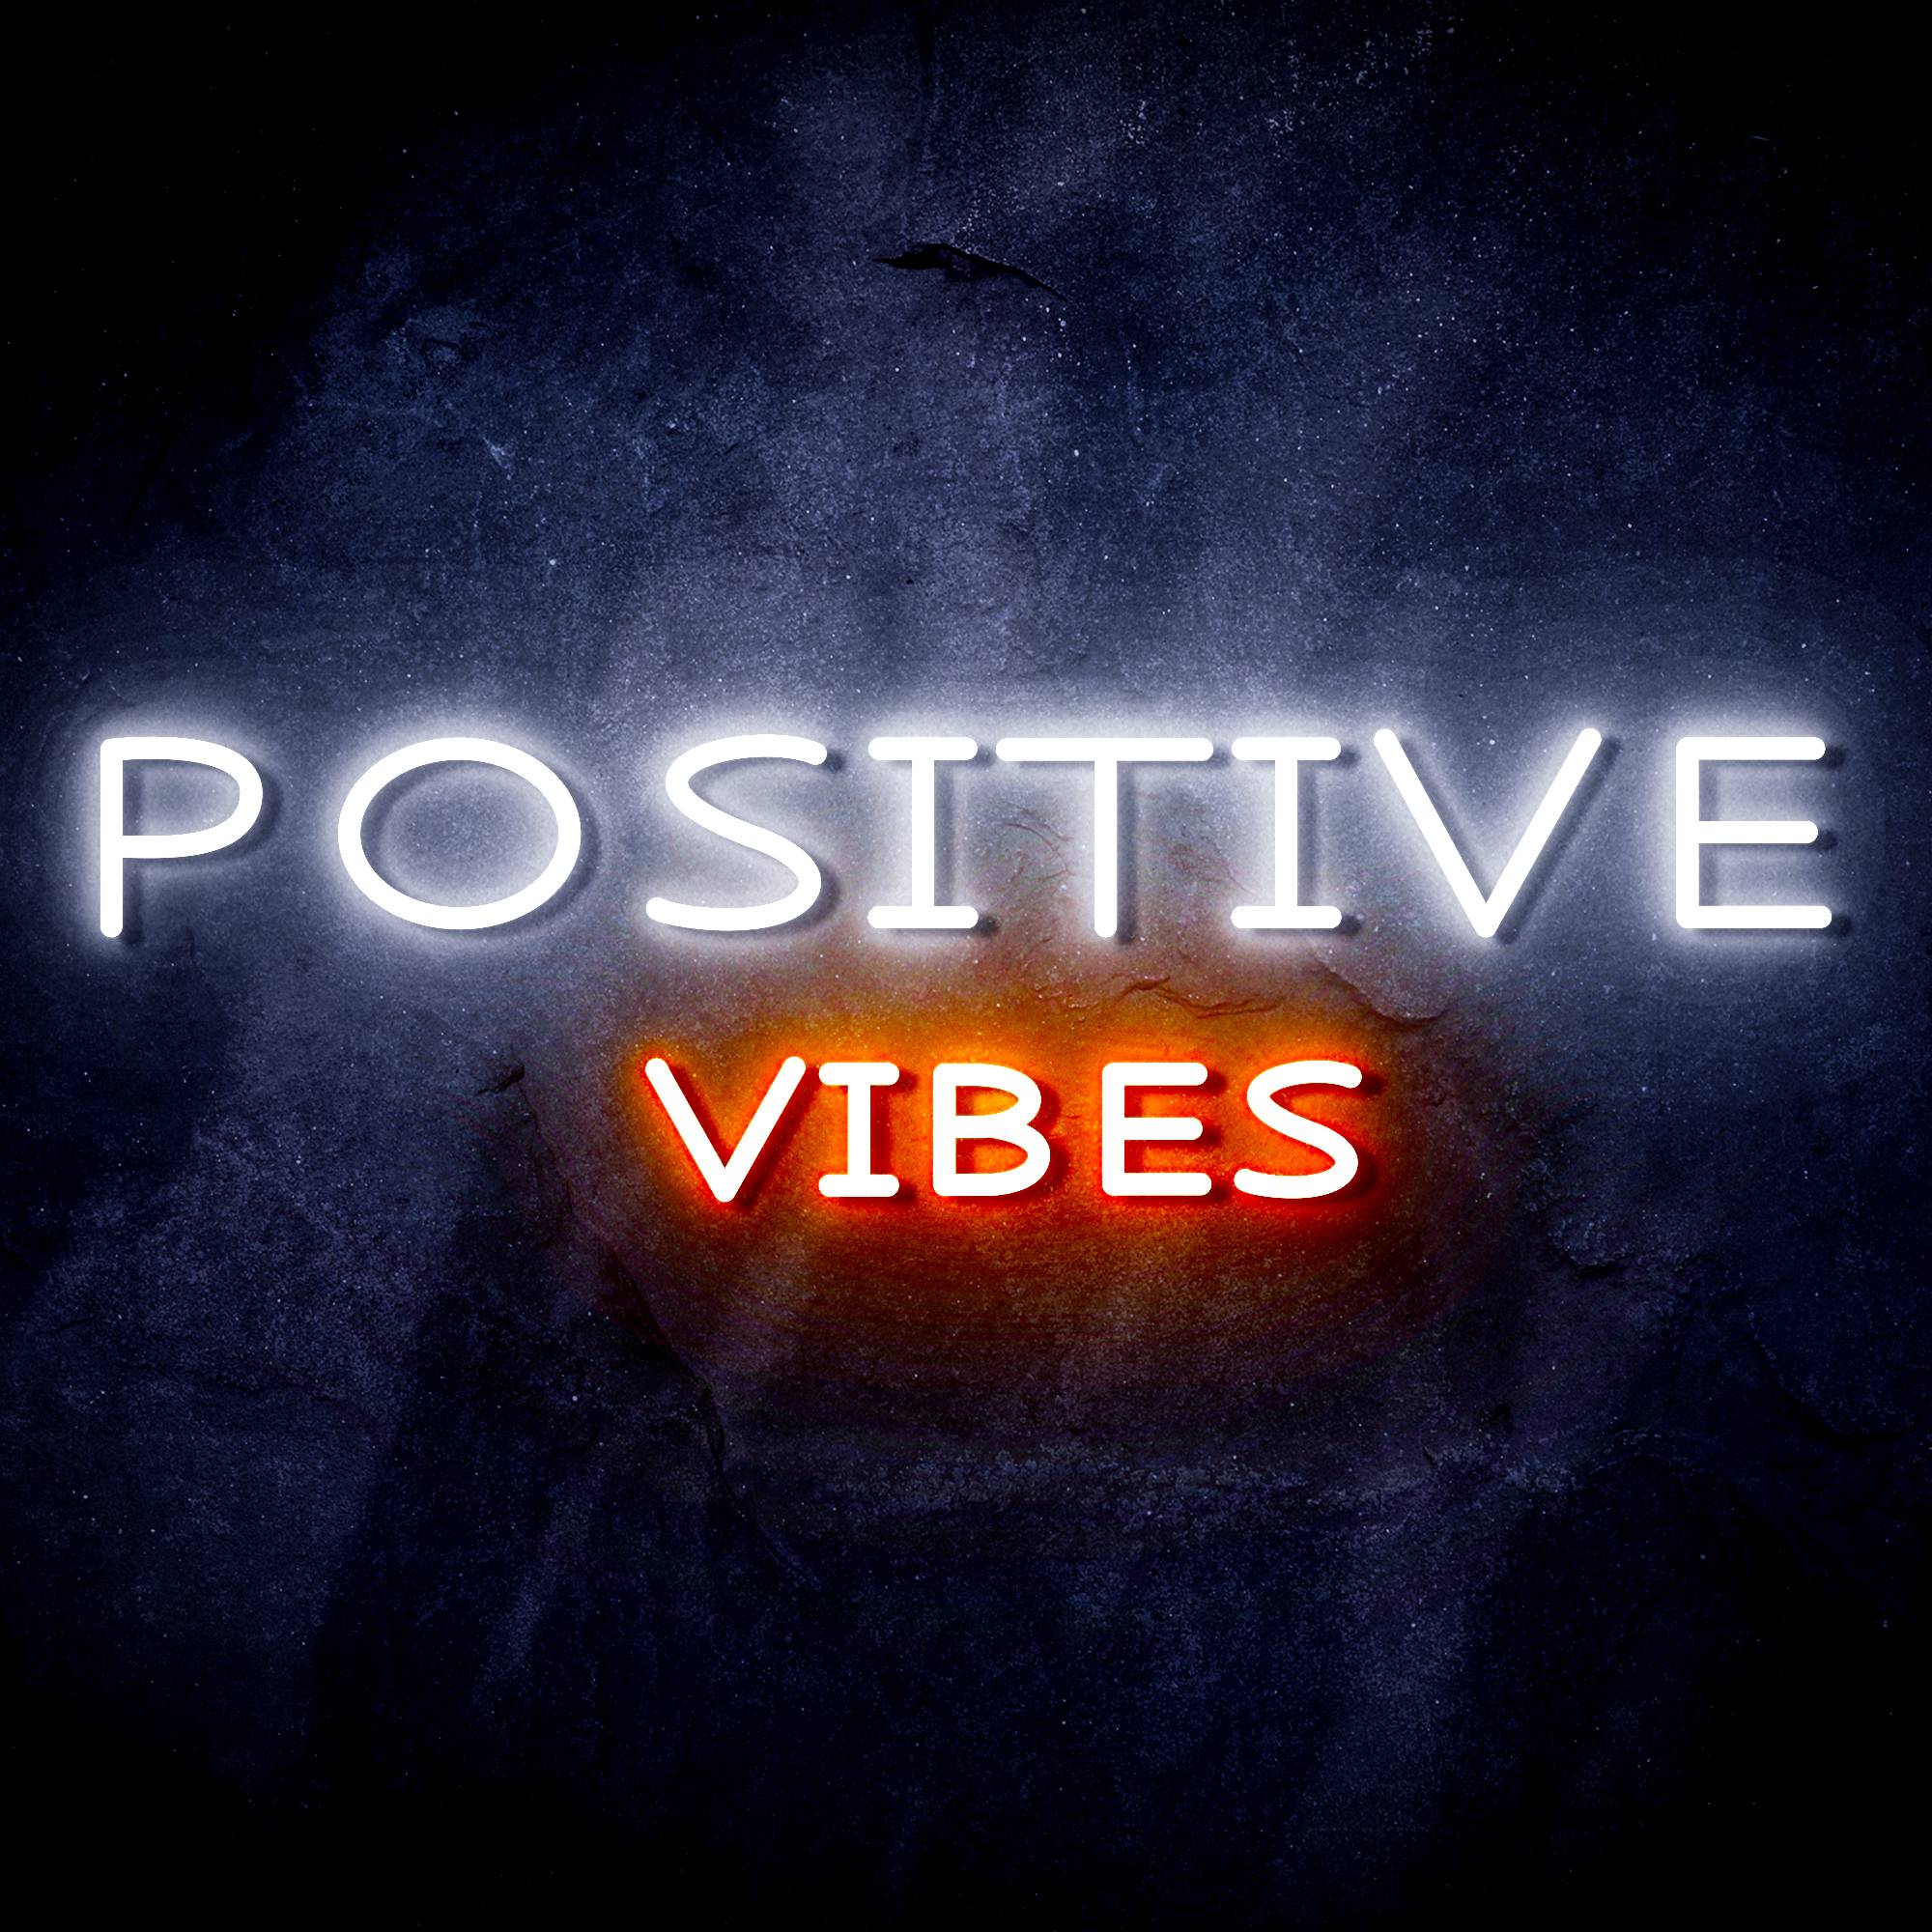 "POSITIVE VIBES" Text Quote LED Neon Sign